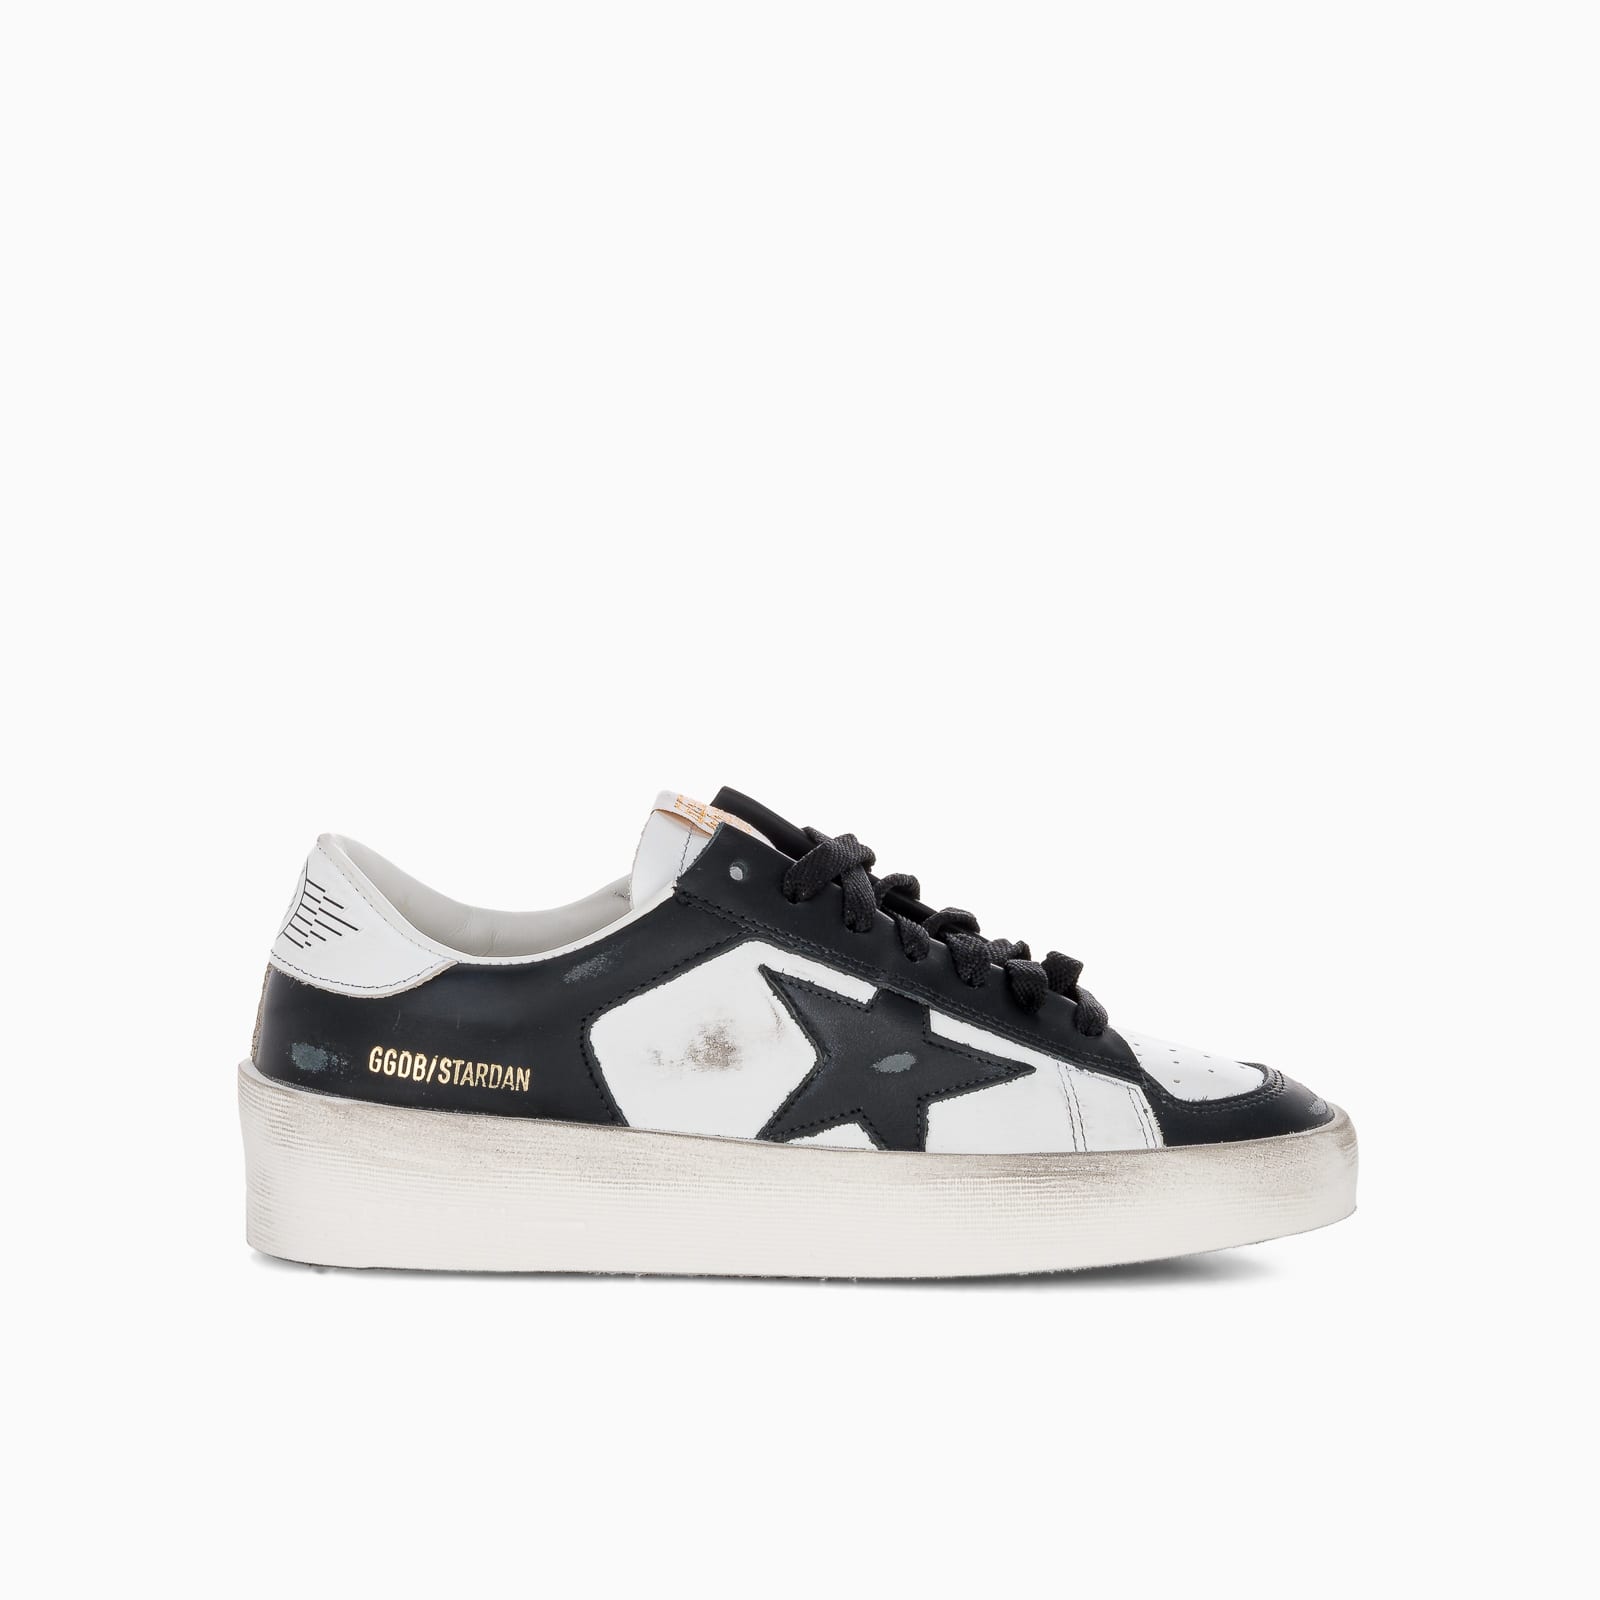 Golden Goose Womens Stardan Sneakers In Black And White Leather